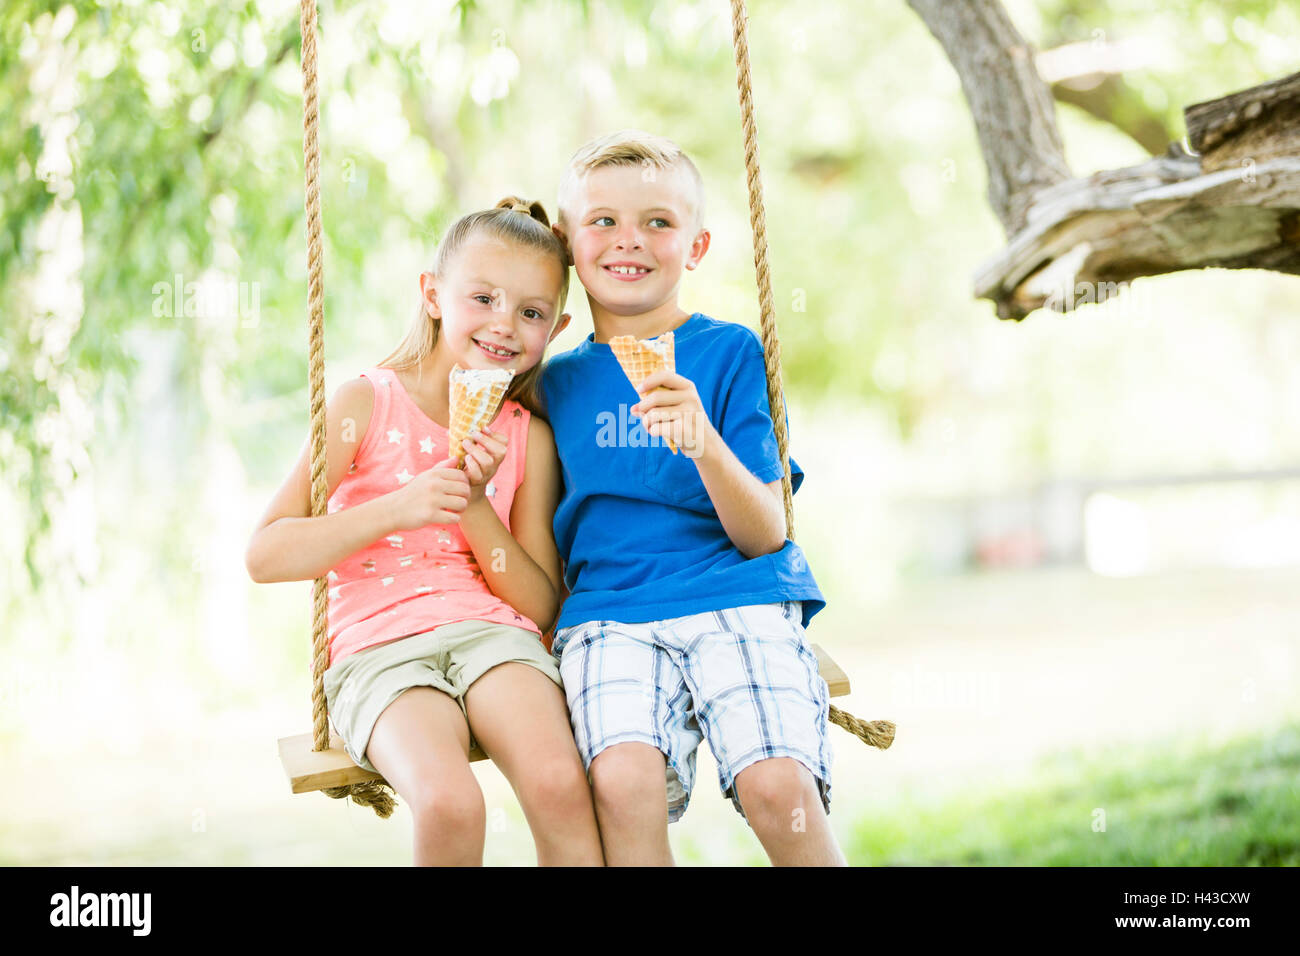 Caucasian brother and sister eating ice cream cones on rope swings Stock Photo